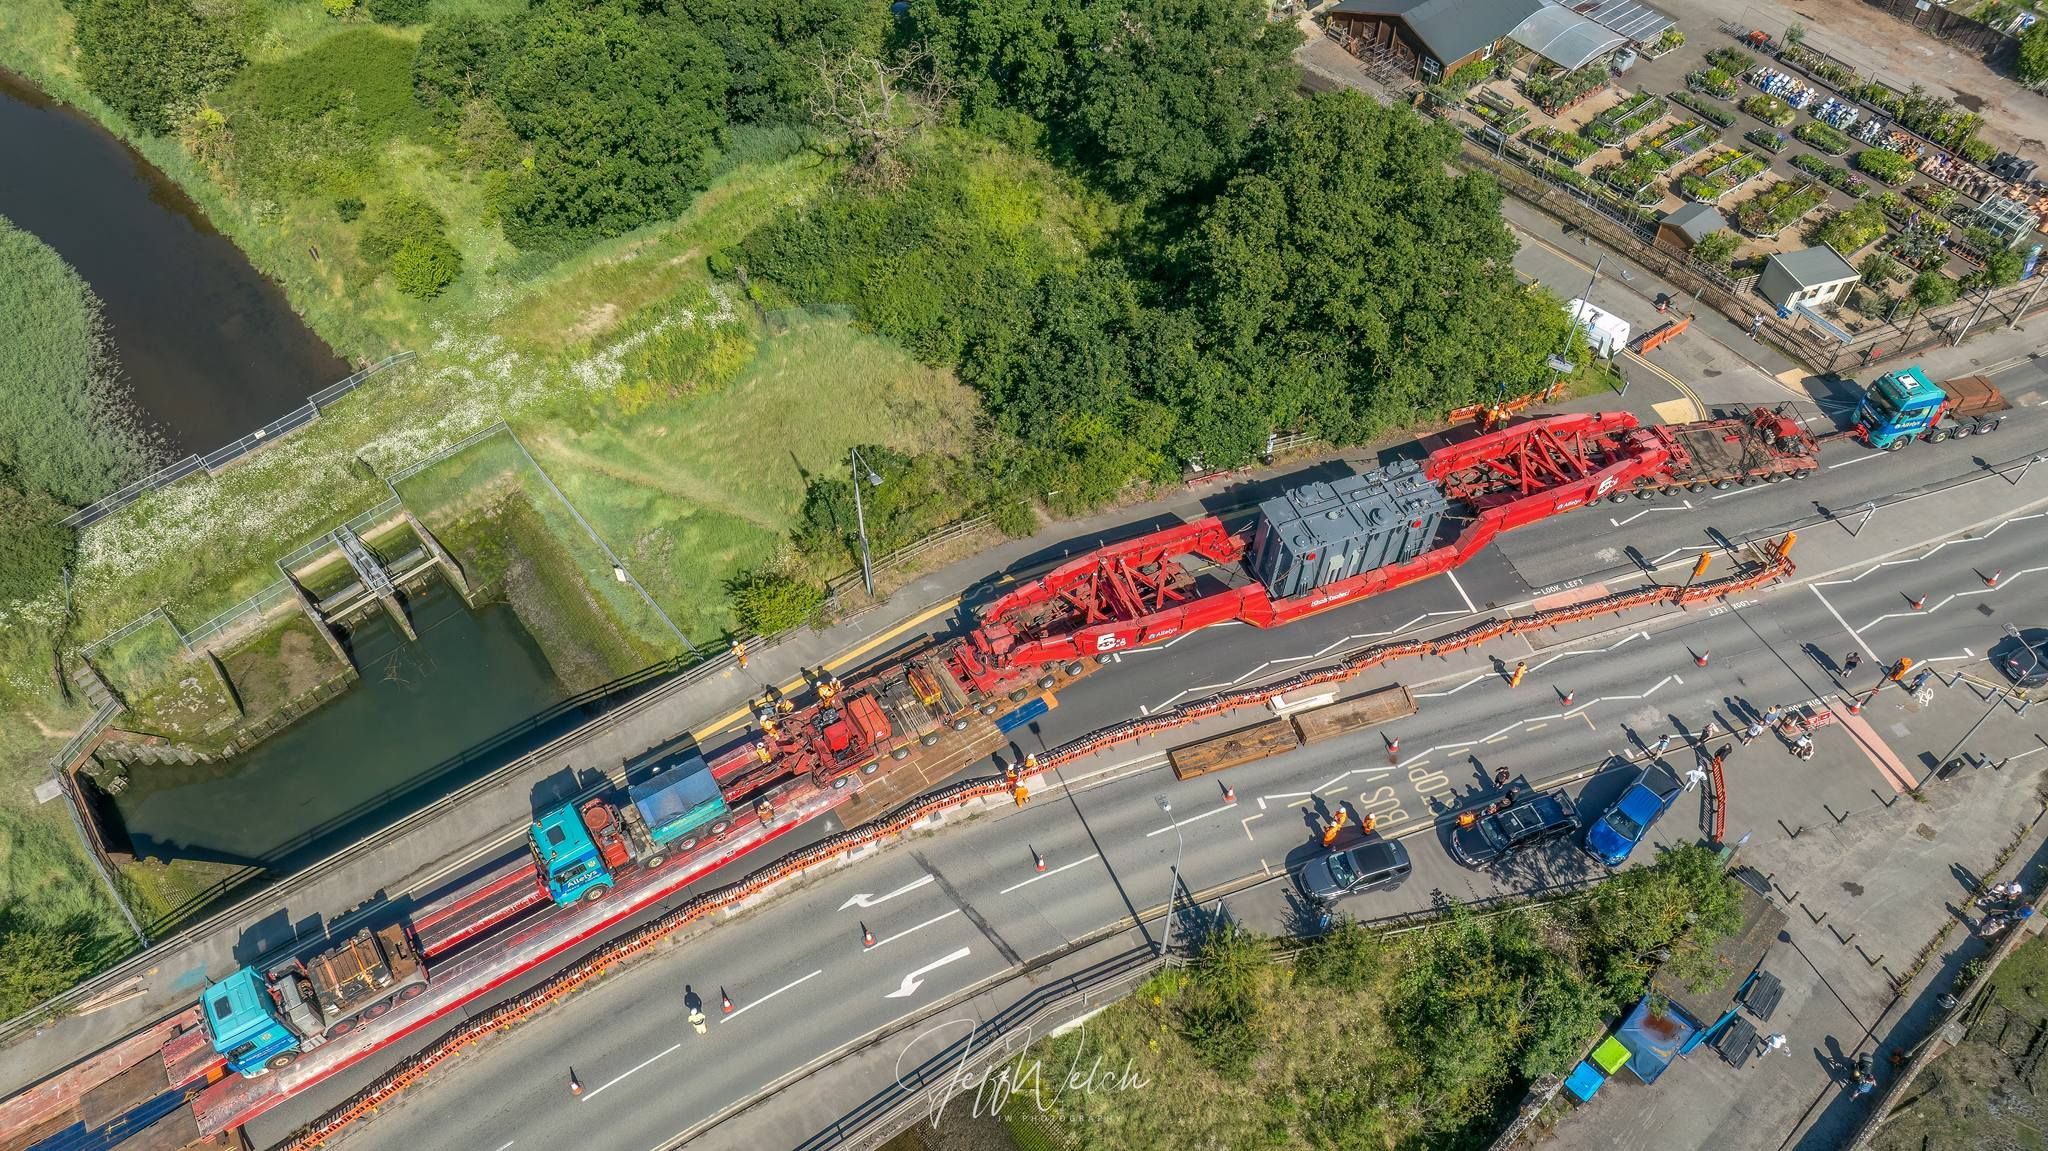 An aerial image of the abnormal load being moved through Ipswich